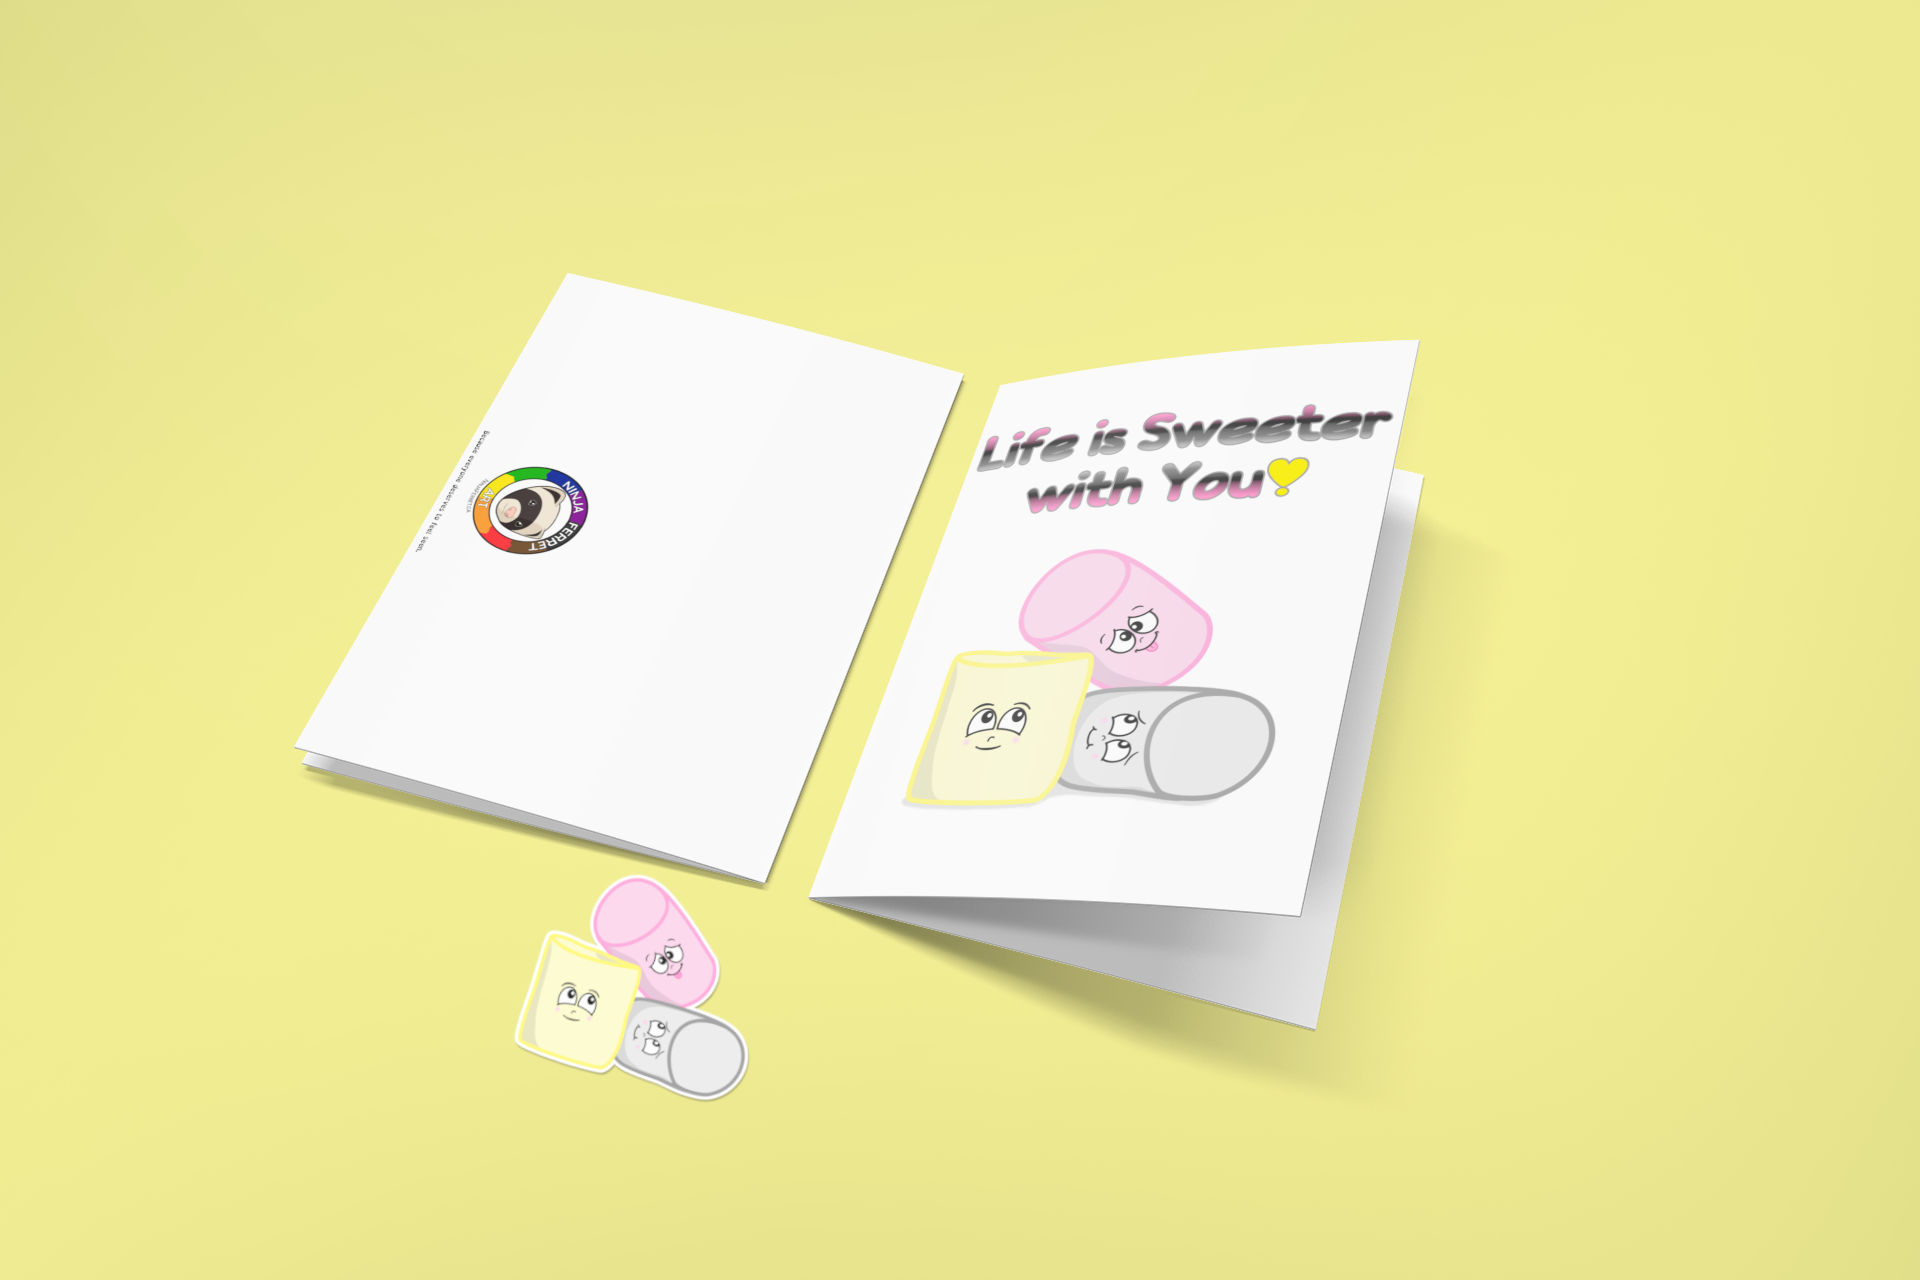 Two greeting cards on a yellow background. The first is flipped to show the back, with the Ninja Ferret Logo. The second has a white background. At the top is the text, "Life is Sweeter with You!" in the queerplatonic pride flag colours. Below are matching pink, yellow, and grey cartoon marshmallows with cute expressions. Below the cards is a matching sticker of three marshmallows.